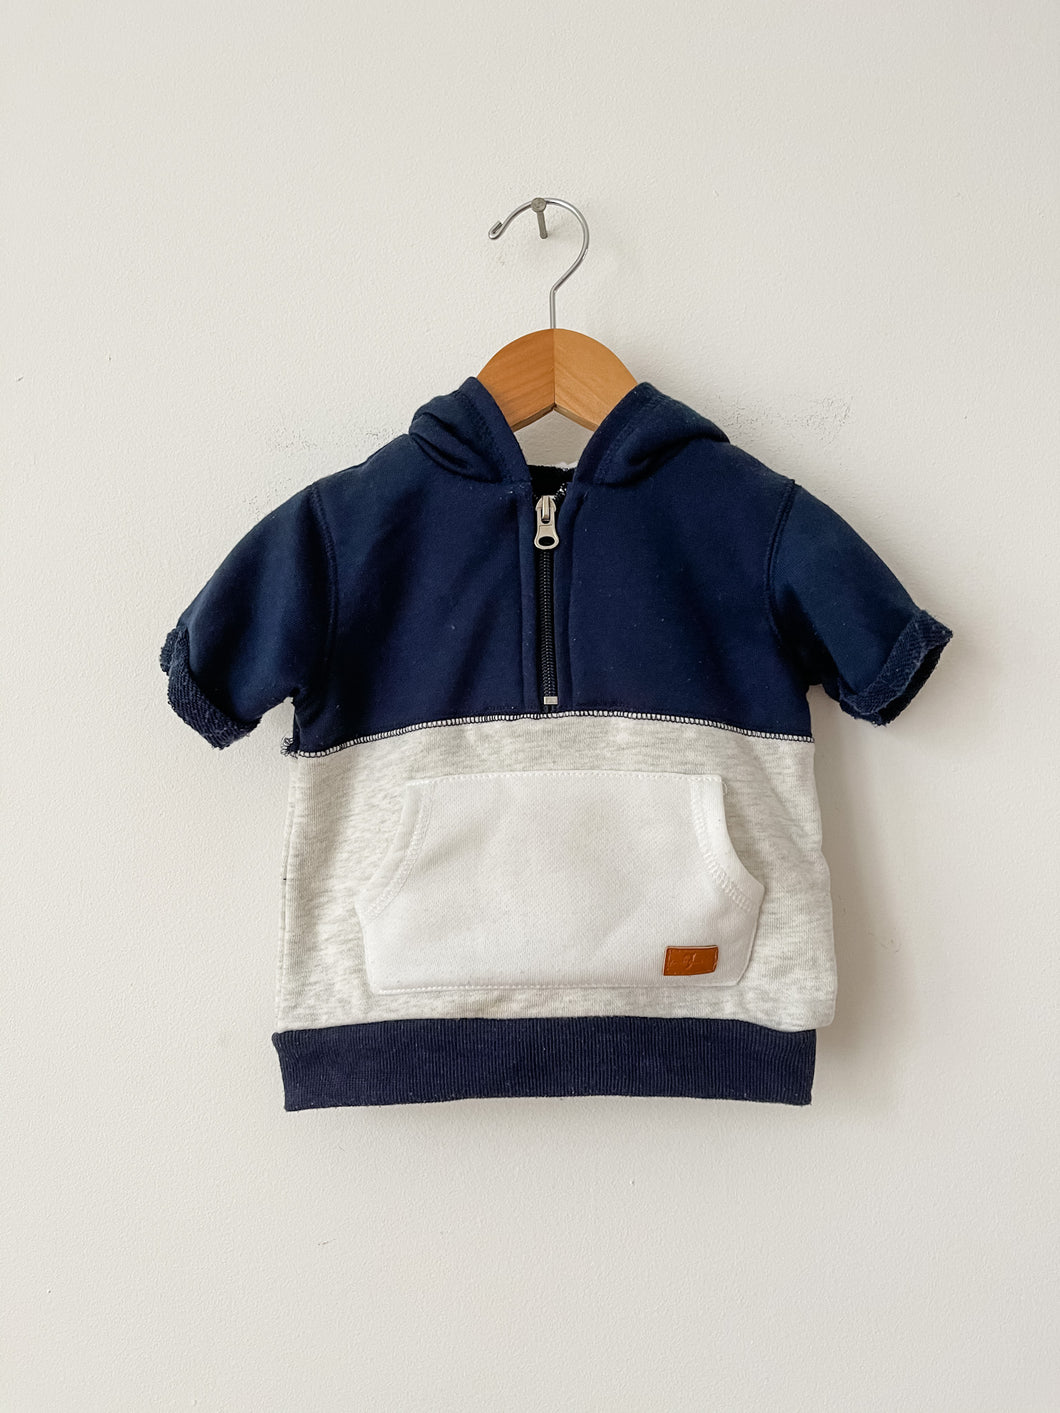 Boys 7 For All Mankind Half Zip Sweater Size 12 Months